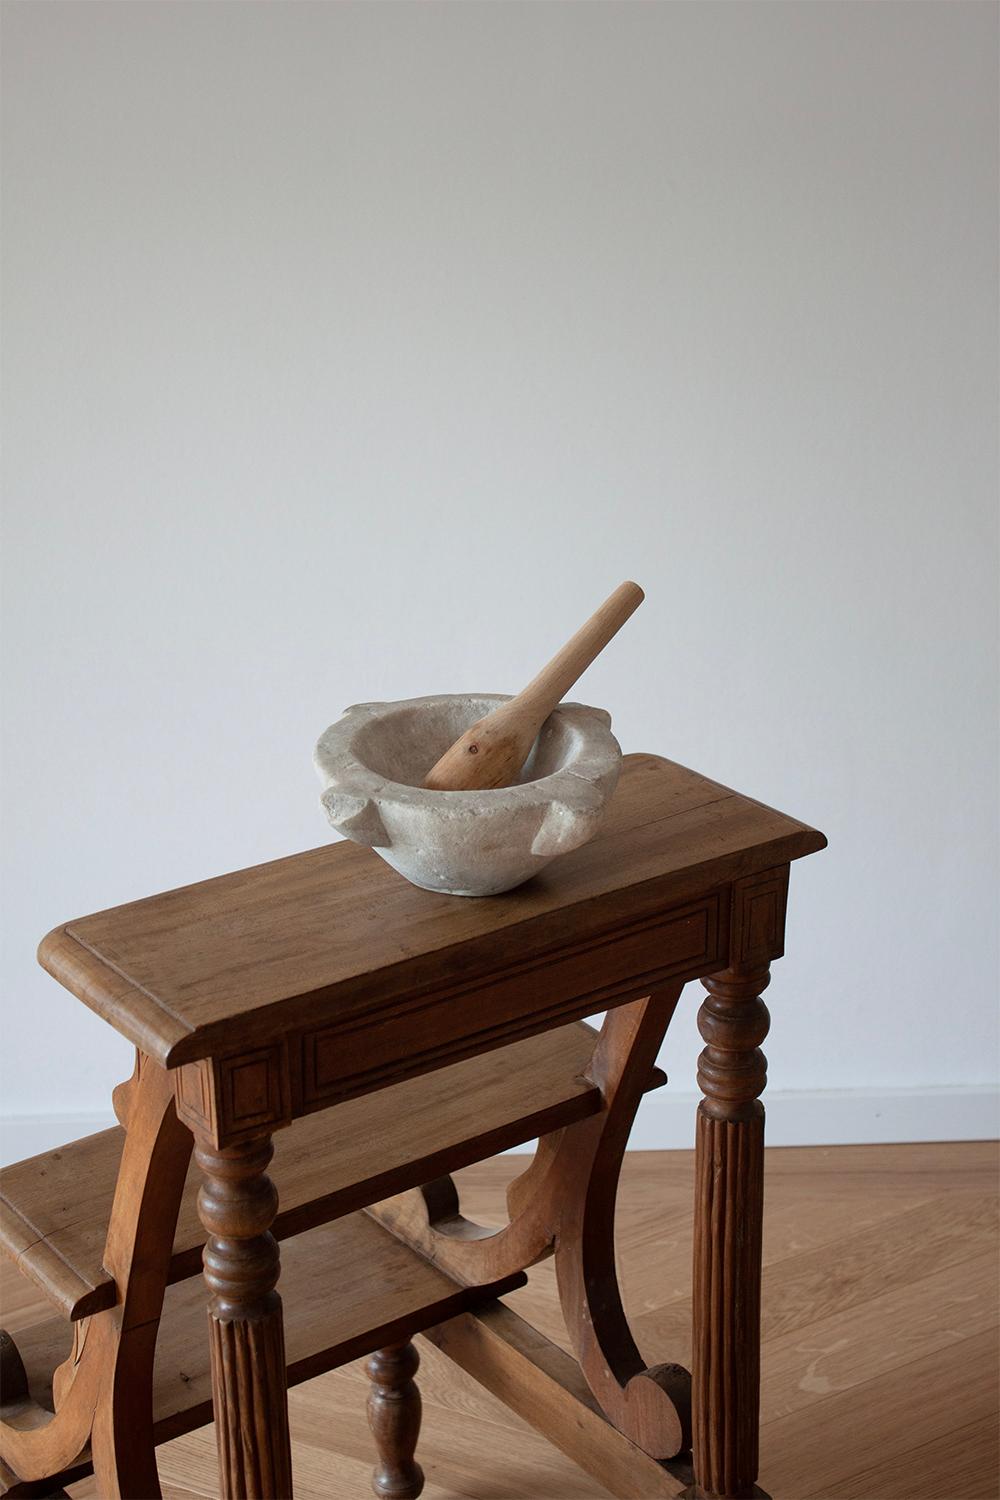 This small antique French mortar was sourced in the south of France. It's an iconic and traditional kitchen object that is found all over France. Its traditional use was and still is to grind seeds and herbs. 
This kitchen mortar will instantly add